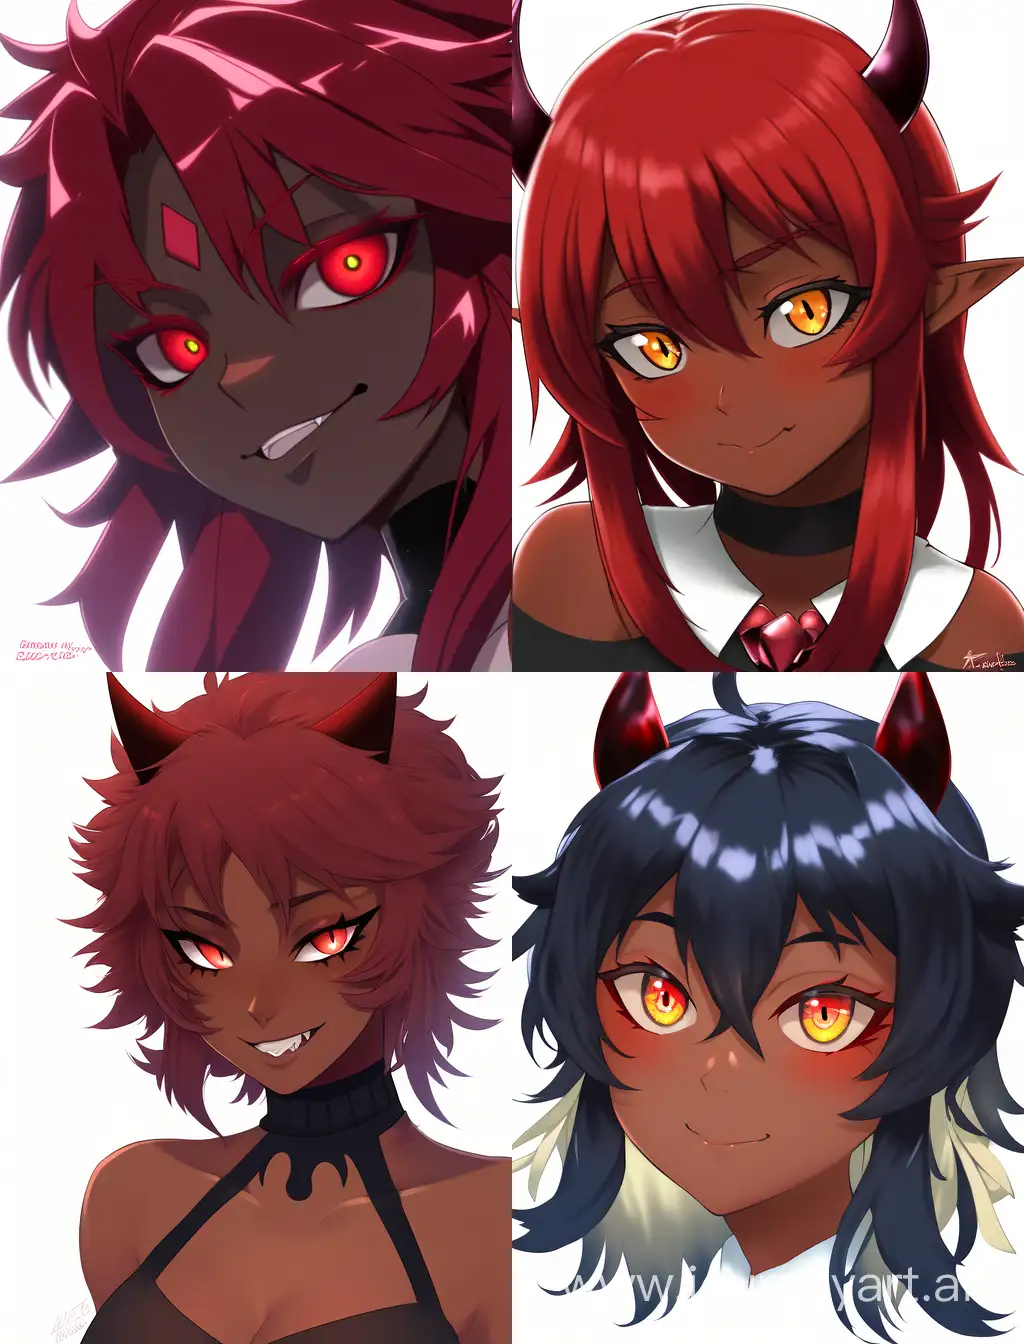 Seductive-Anime-Demoness-Dark-RedSkinned-Beauty-with-Fangs-and-Blush